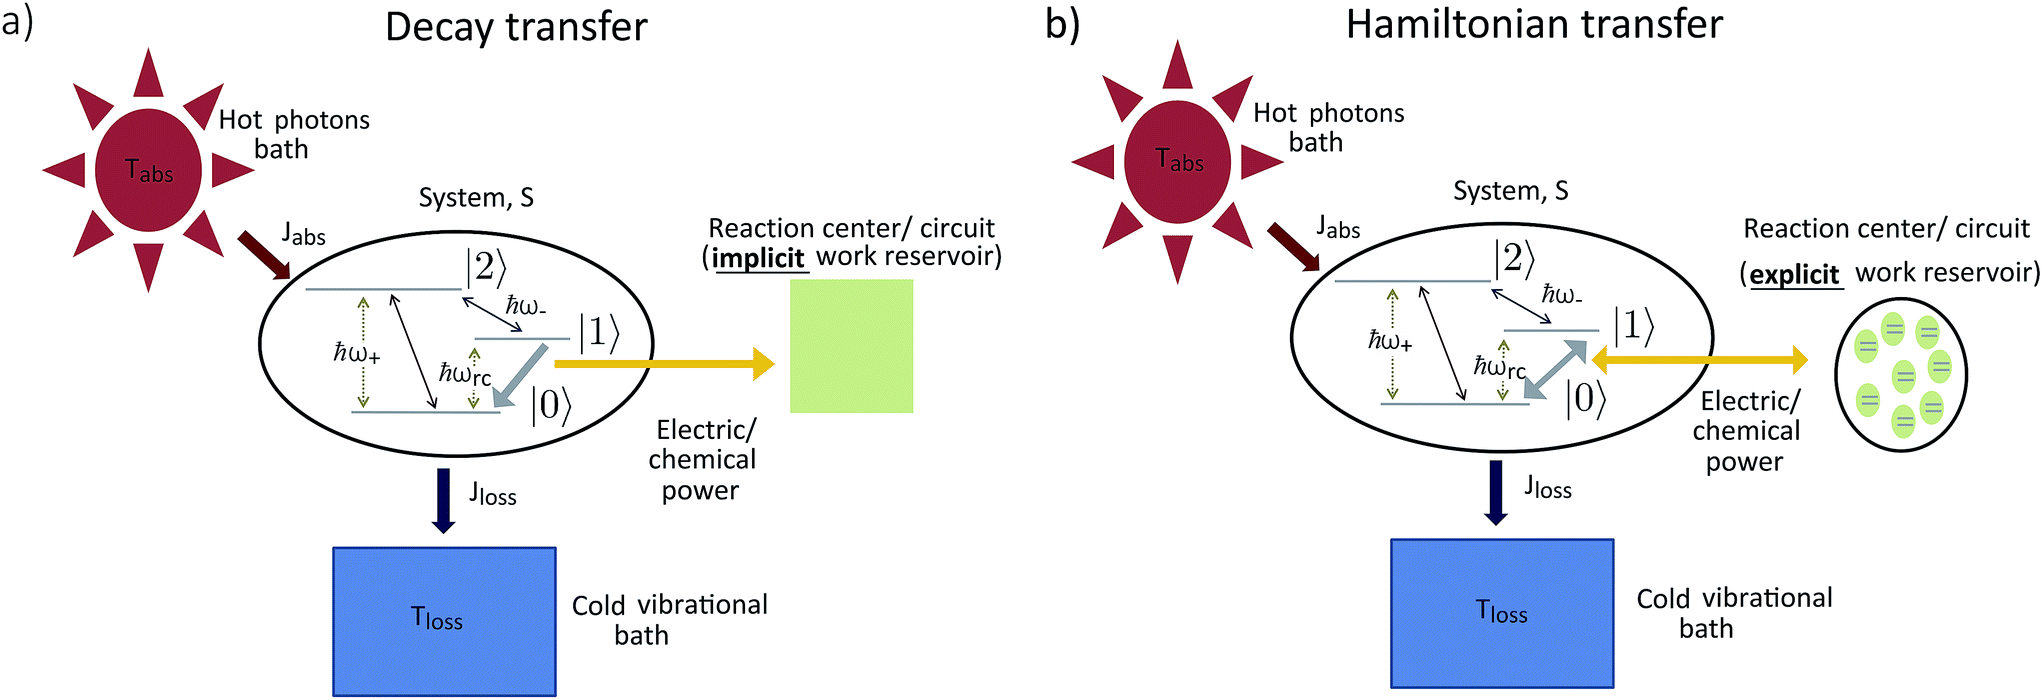 On thermodynamic inconsistencies in several photosynthetic and solar